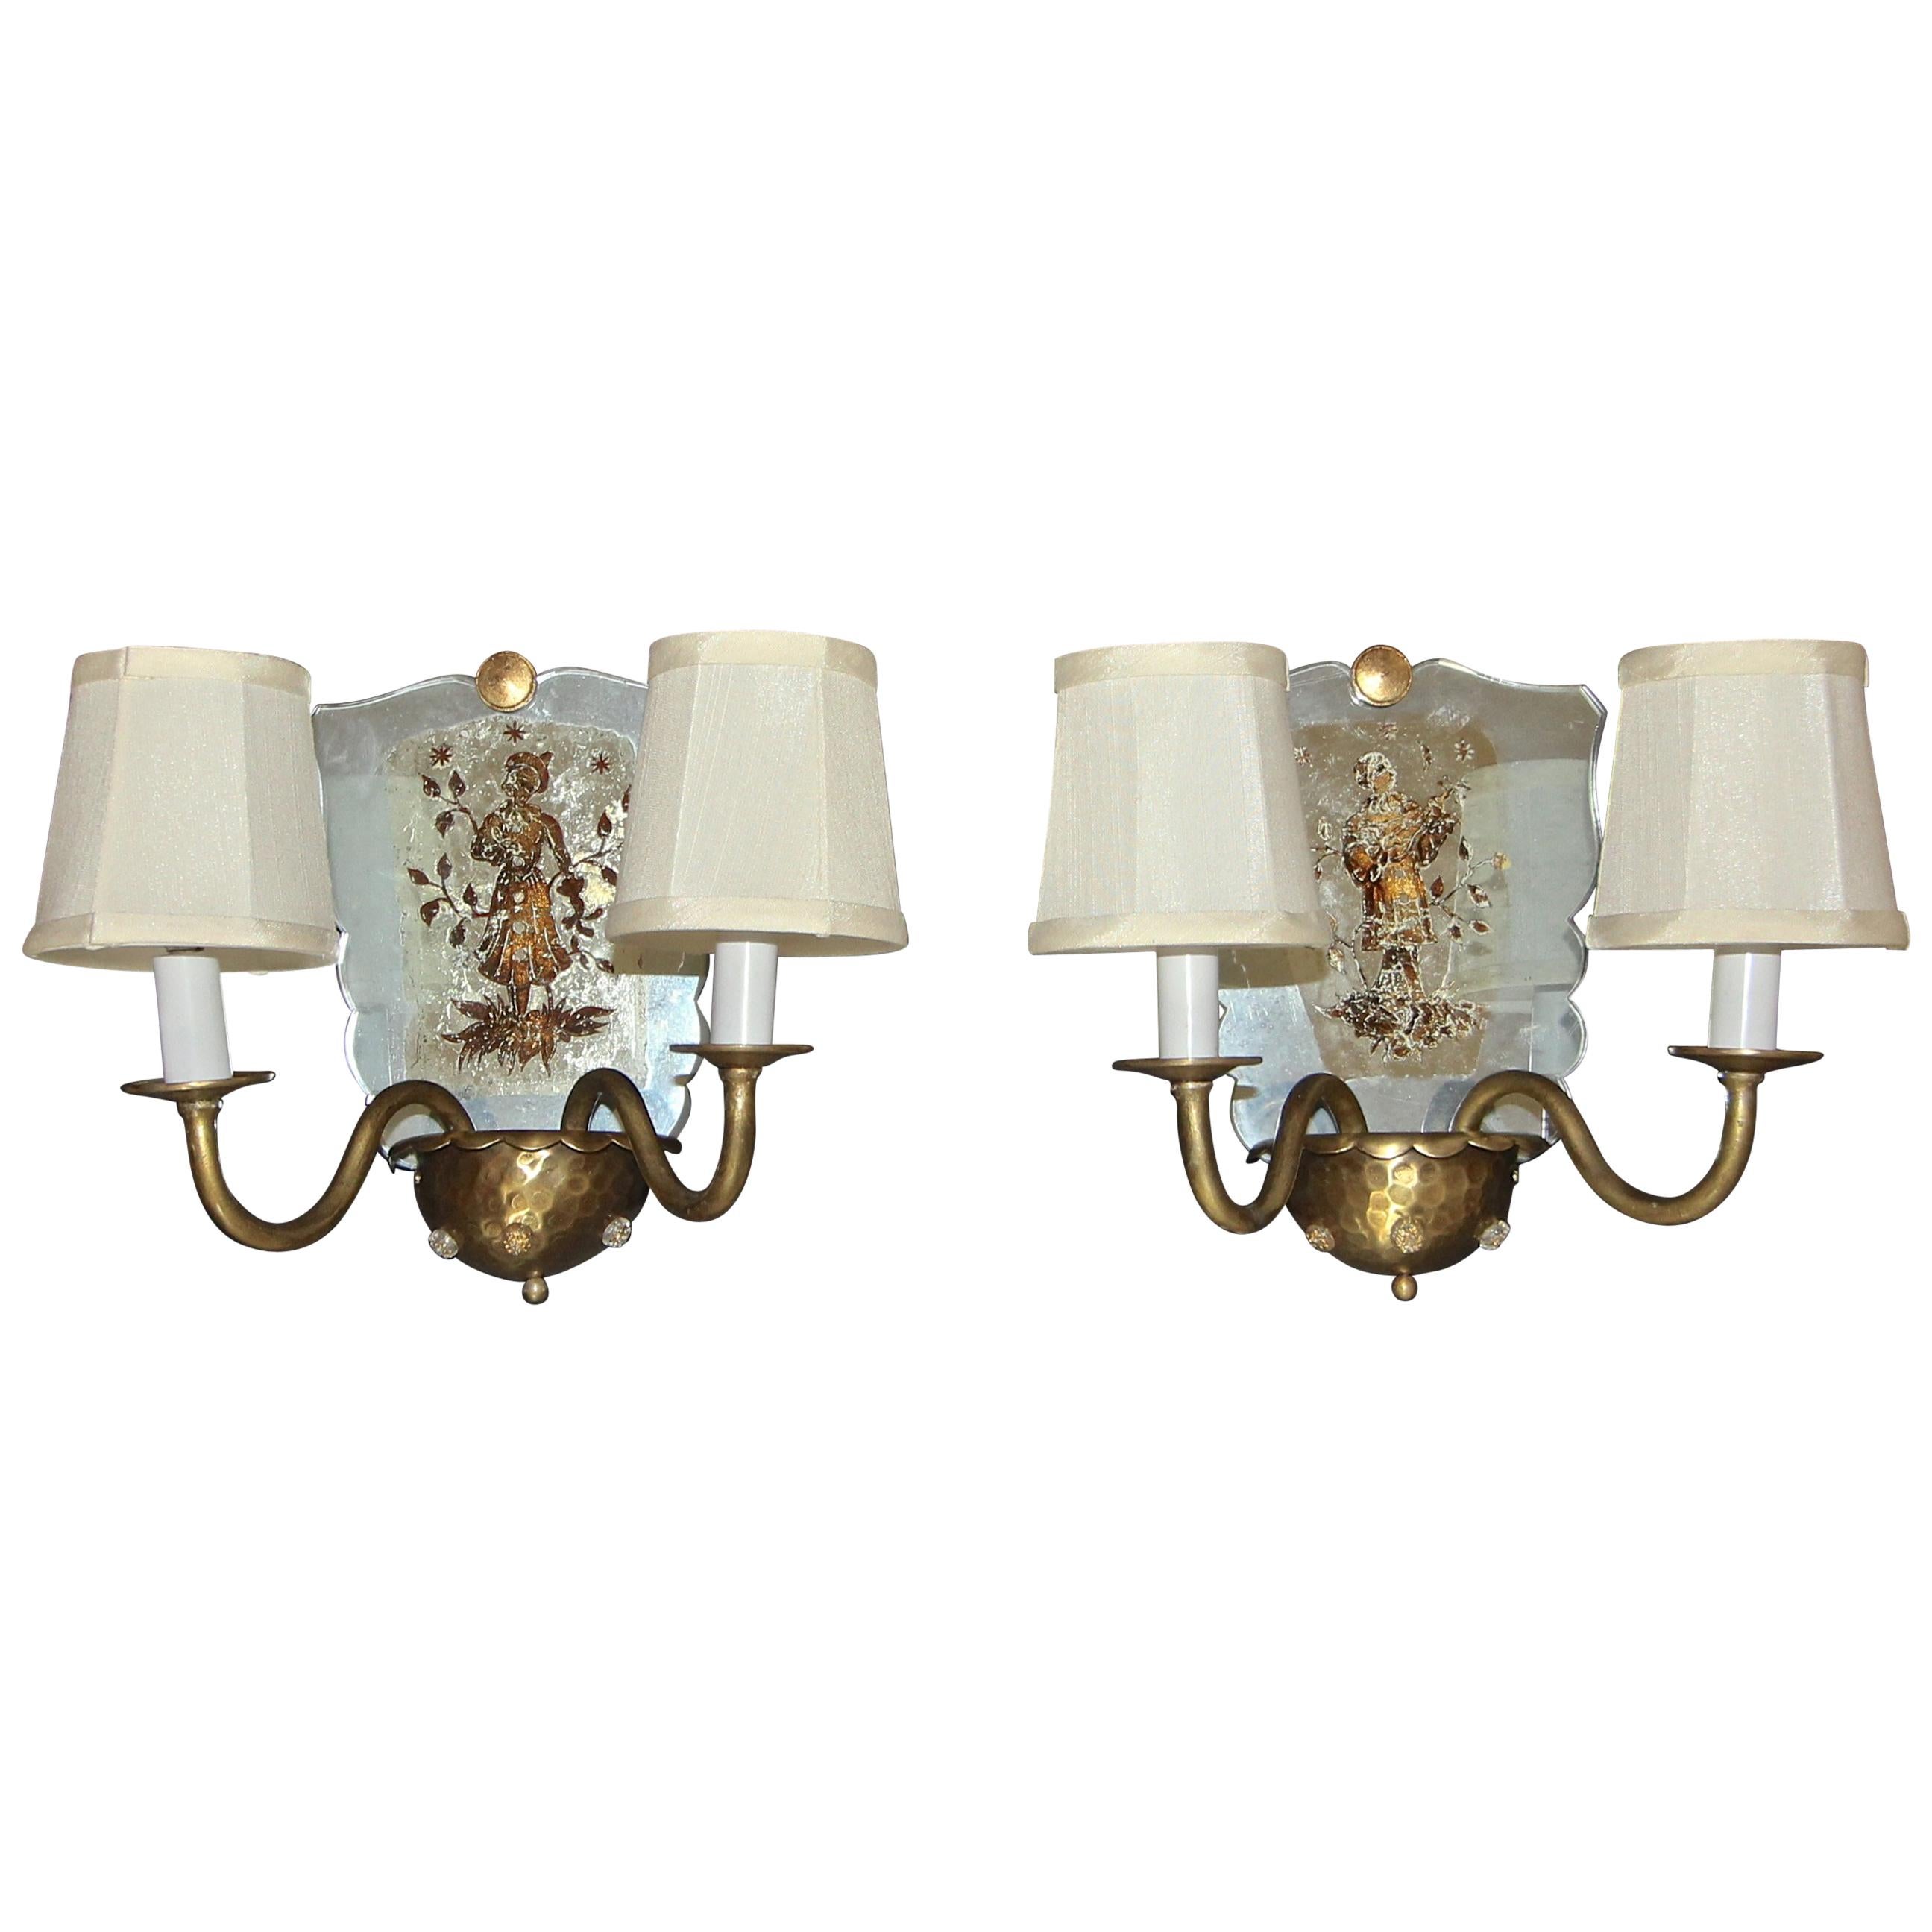 Pair of Venetian Italian Mirrored Wall Light Sconces For Sale